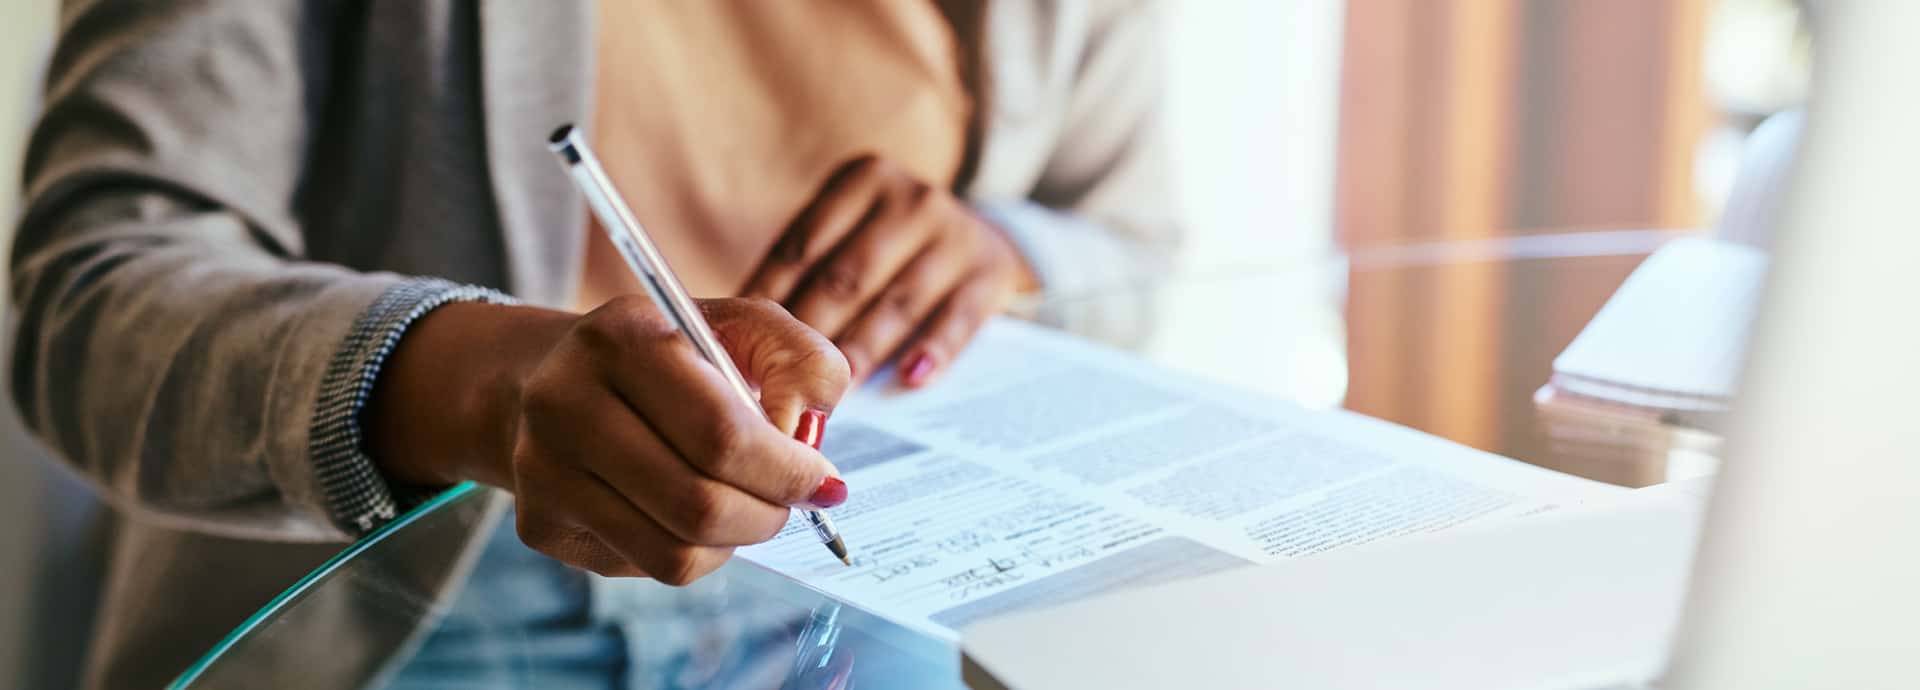 A lady signing on a document